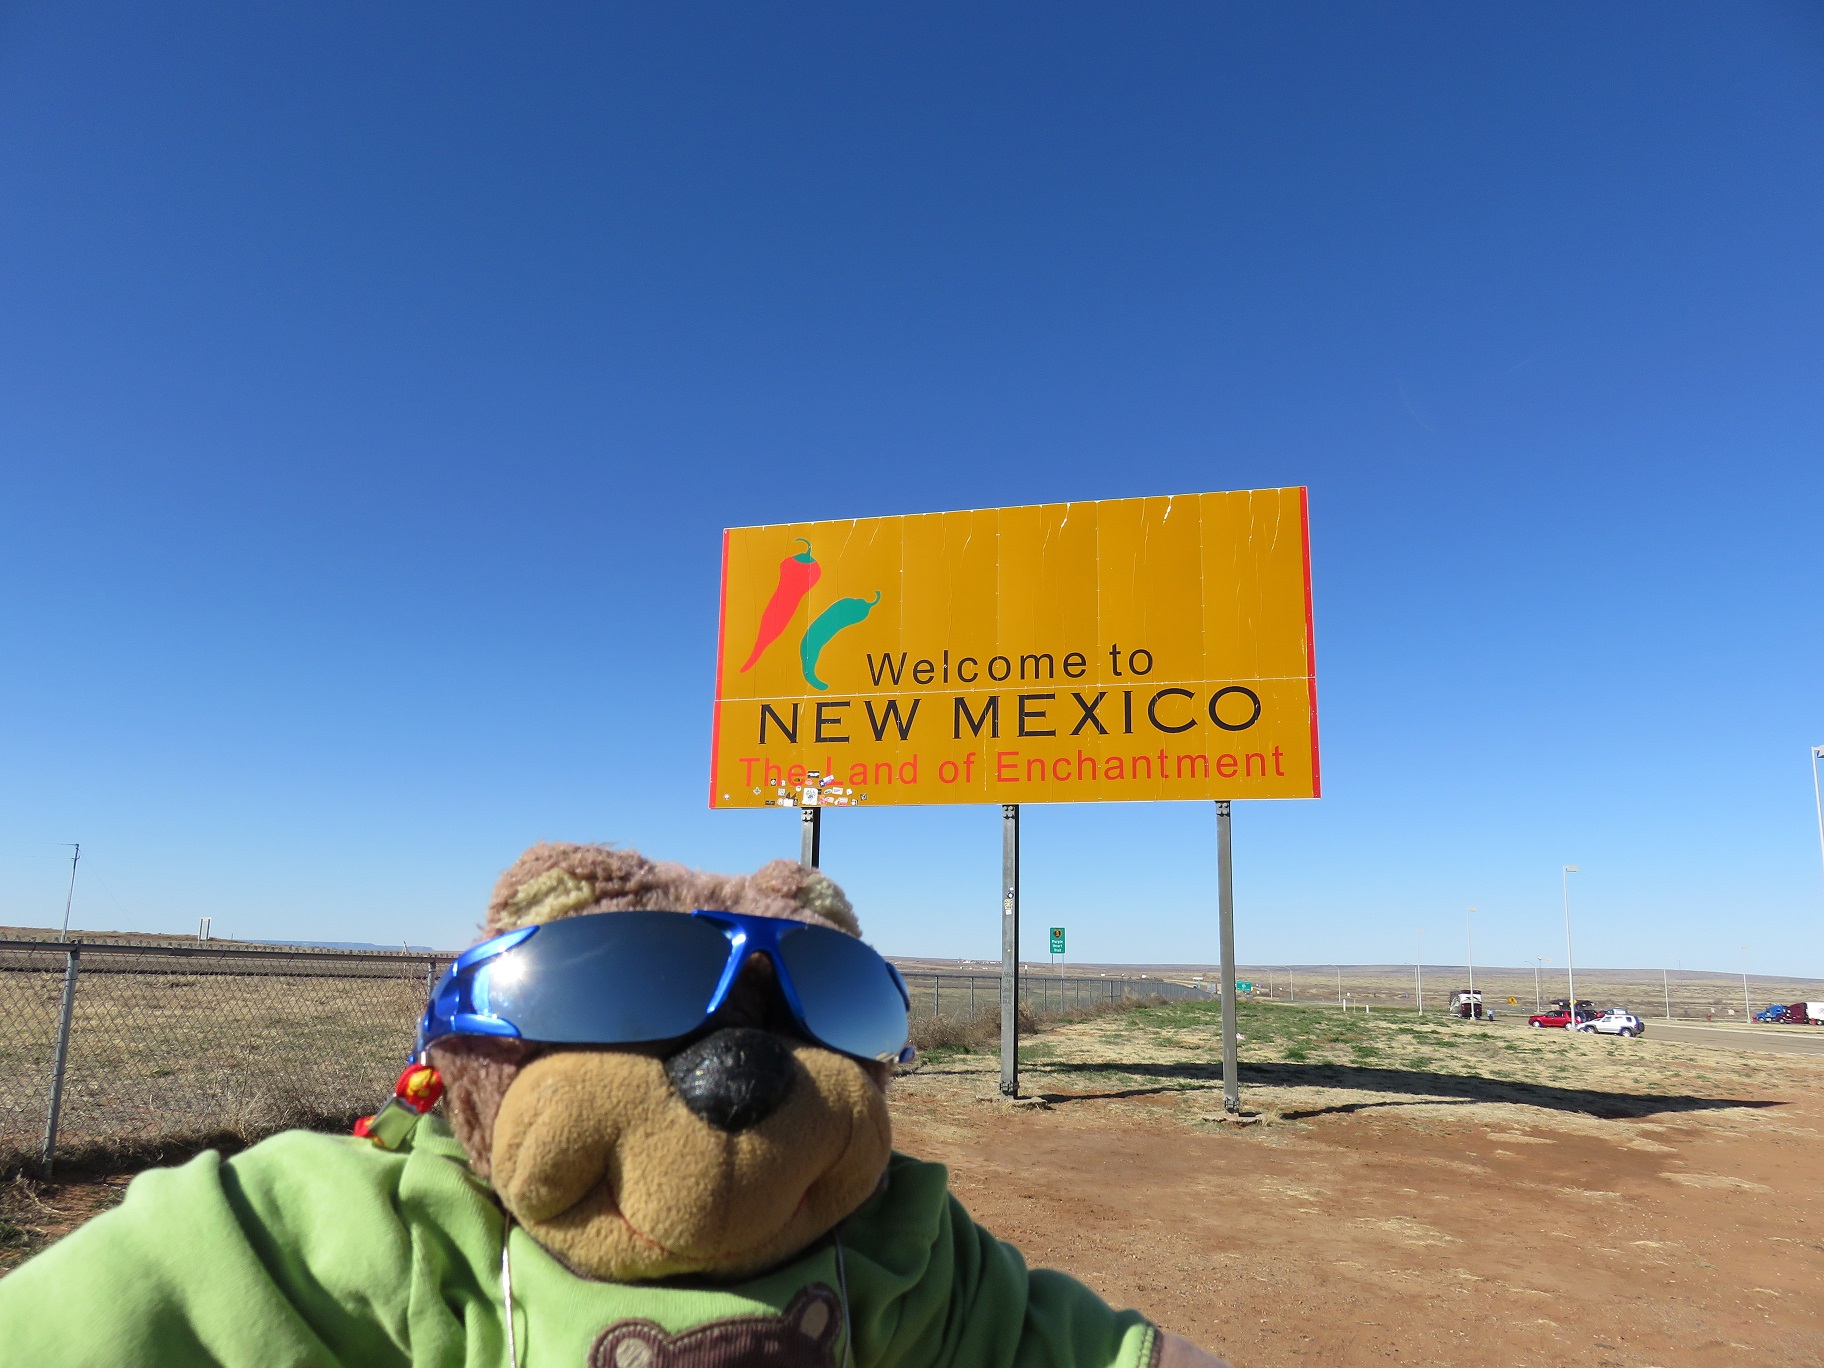 Teddy Tedaloo arrives in New Mexico